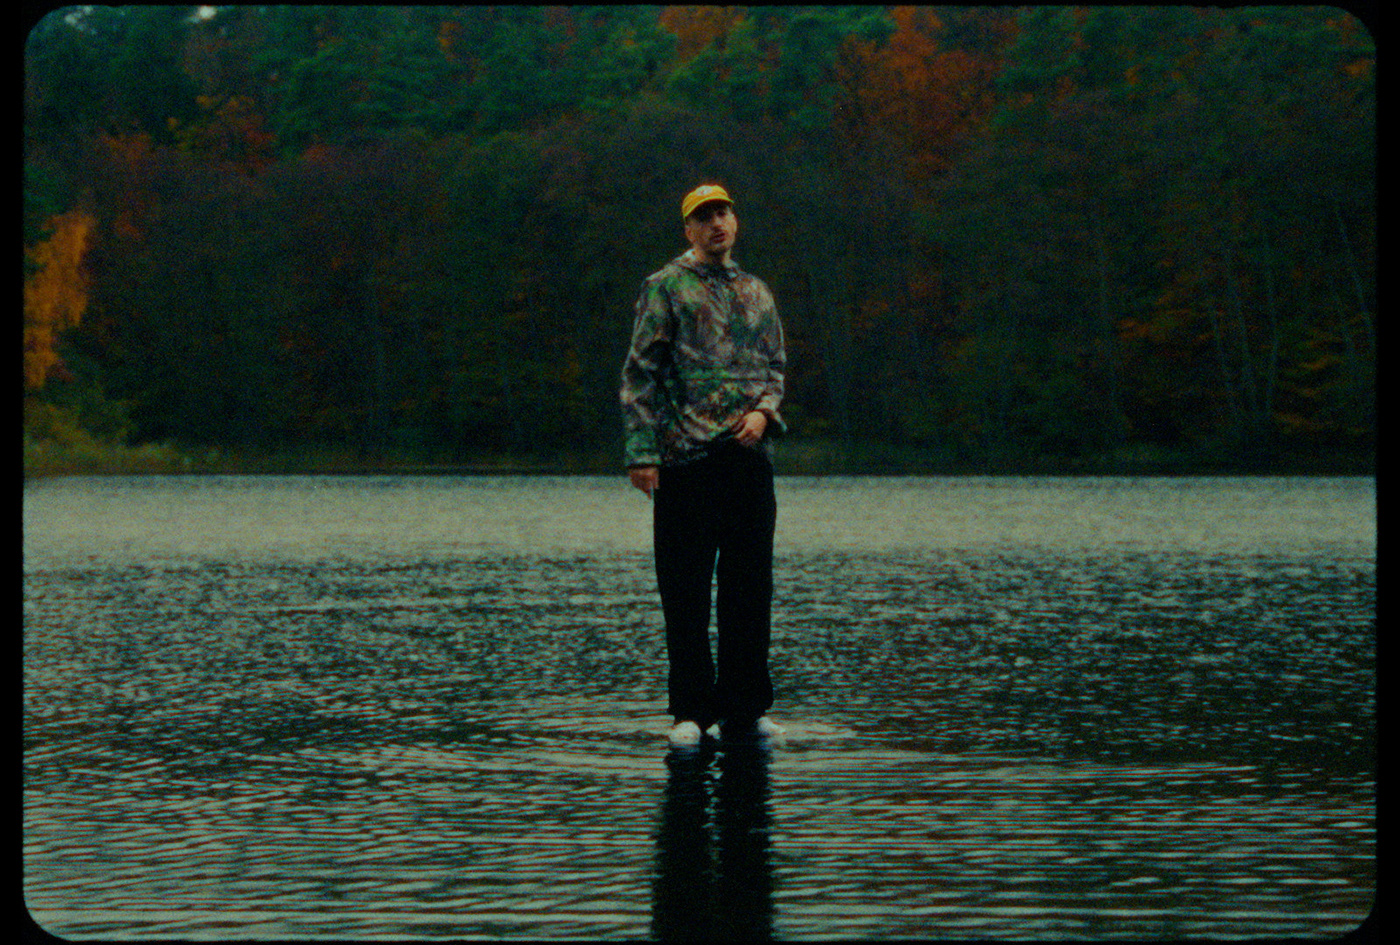 music video дп zoom zooming Oneshot Fall arri angenieux DOP standing on water